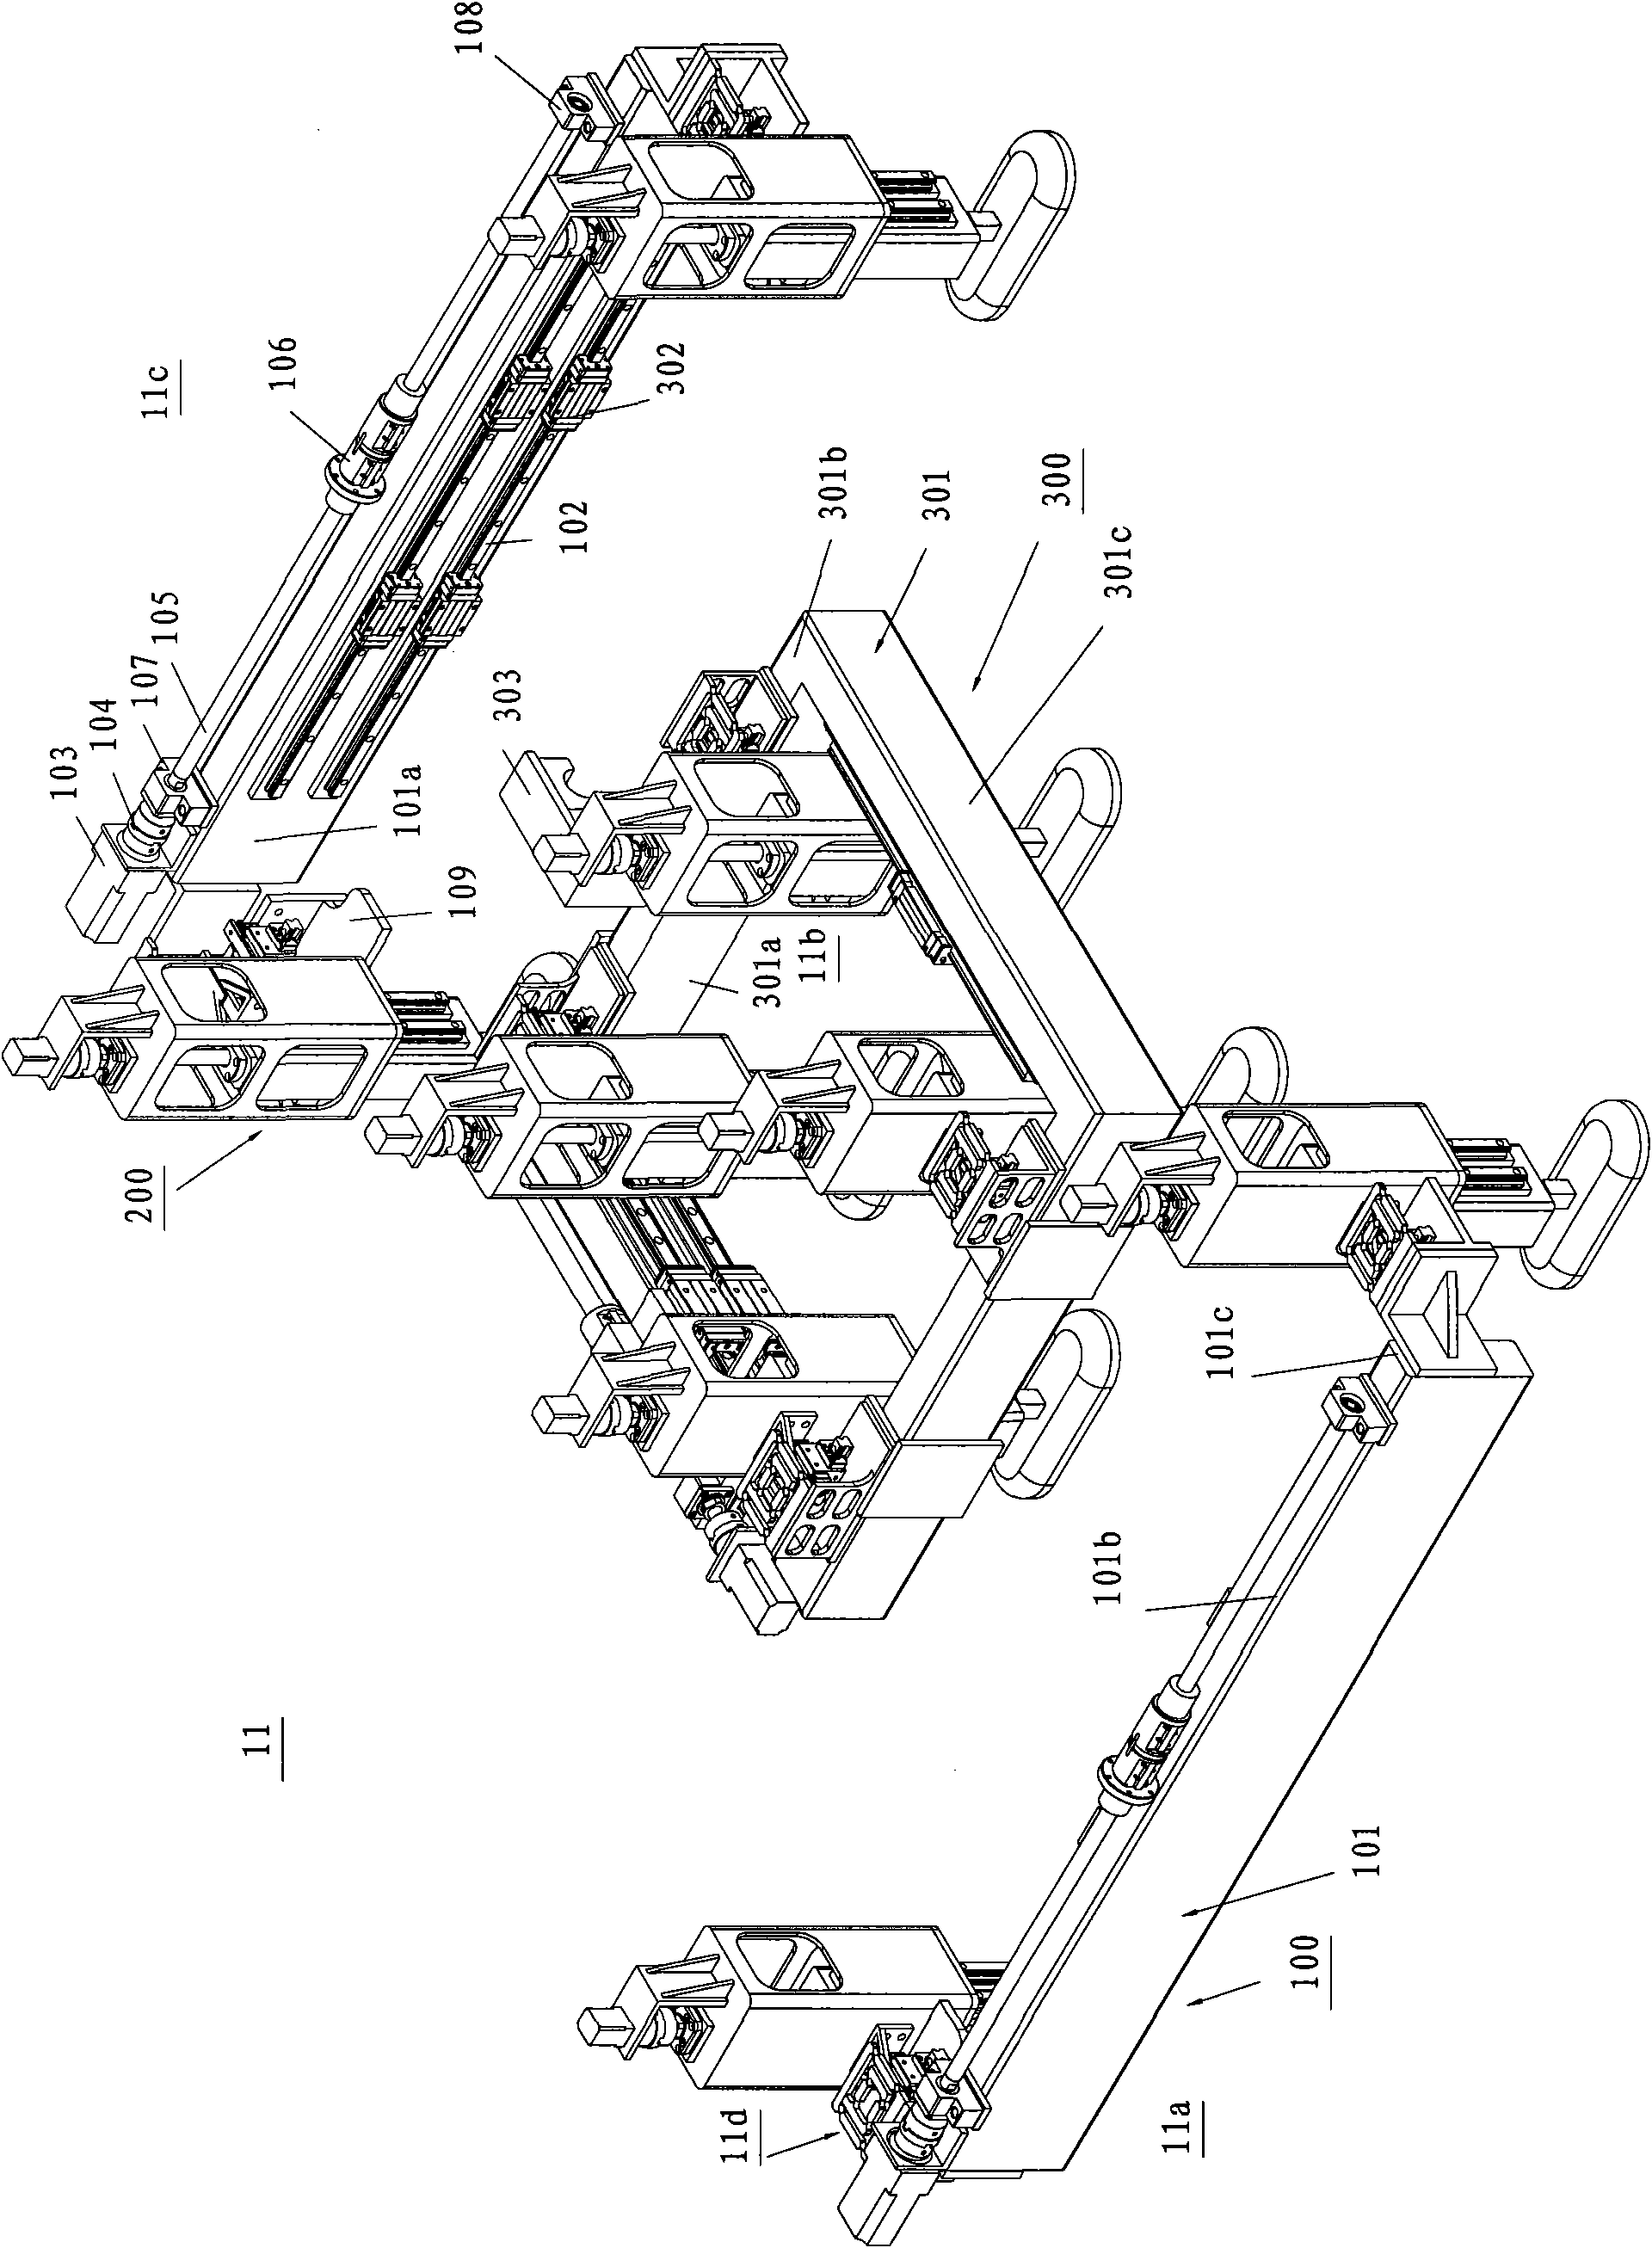 Walking and positioning device for walking and positioning on workpiece